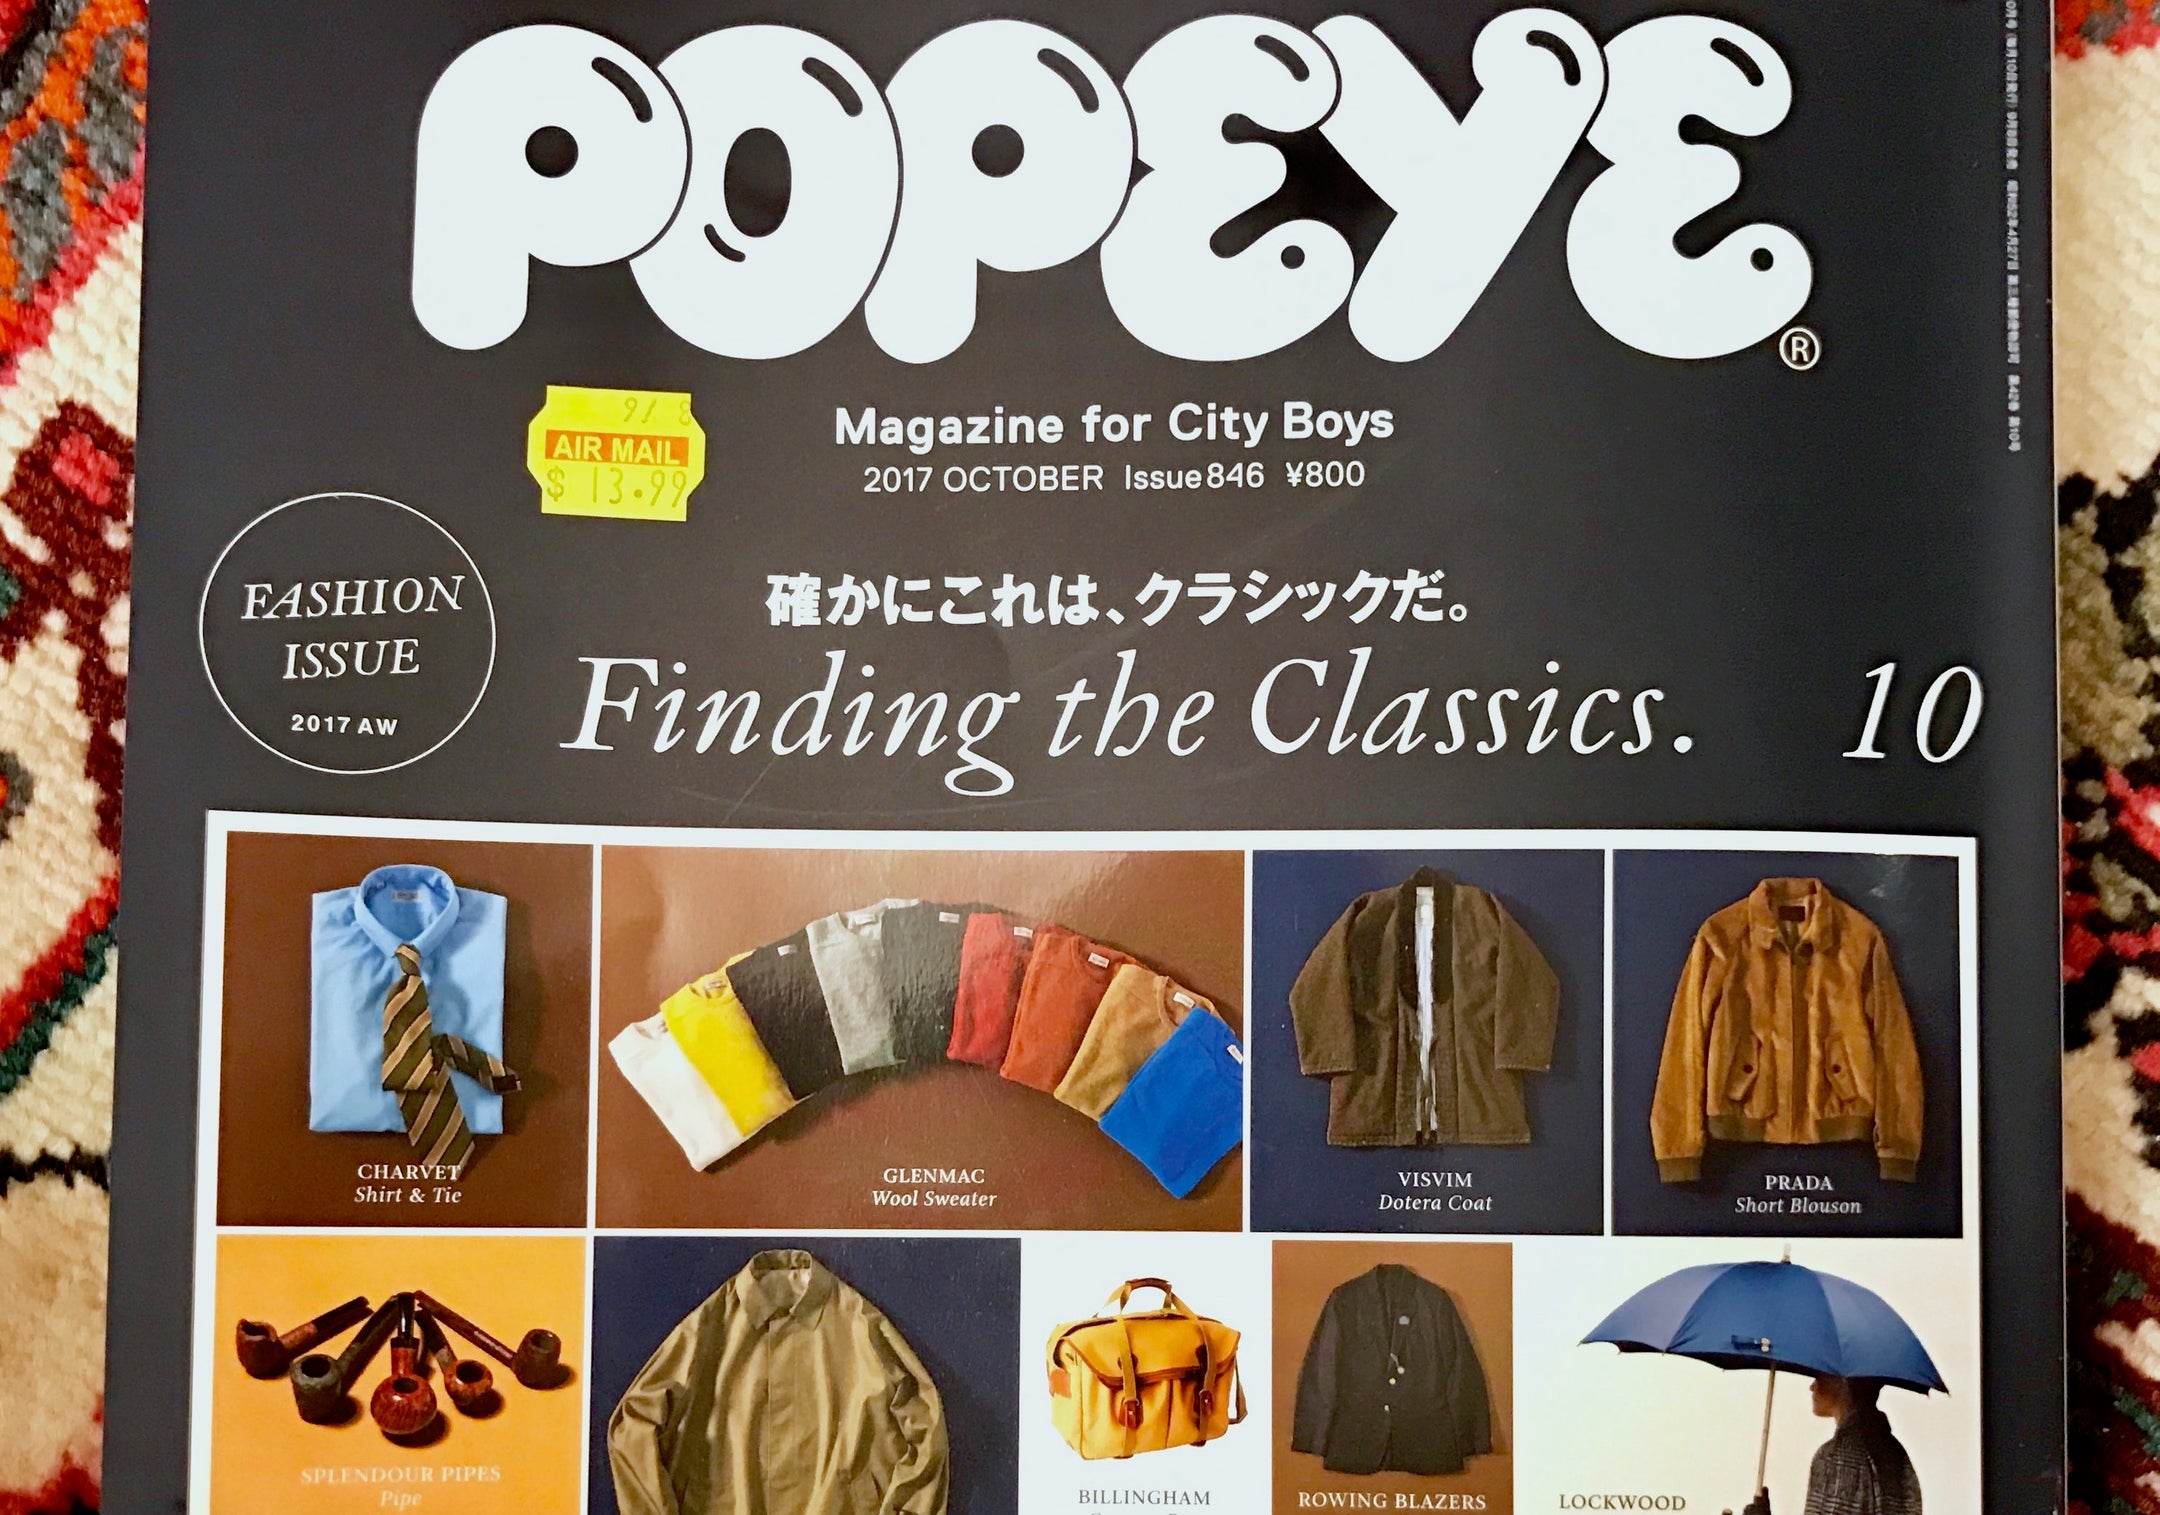 Approved for City Boys (Rowing Blazers in and on the cover of Japan's famous Popeye Magazine)